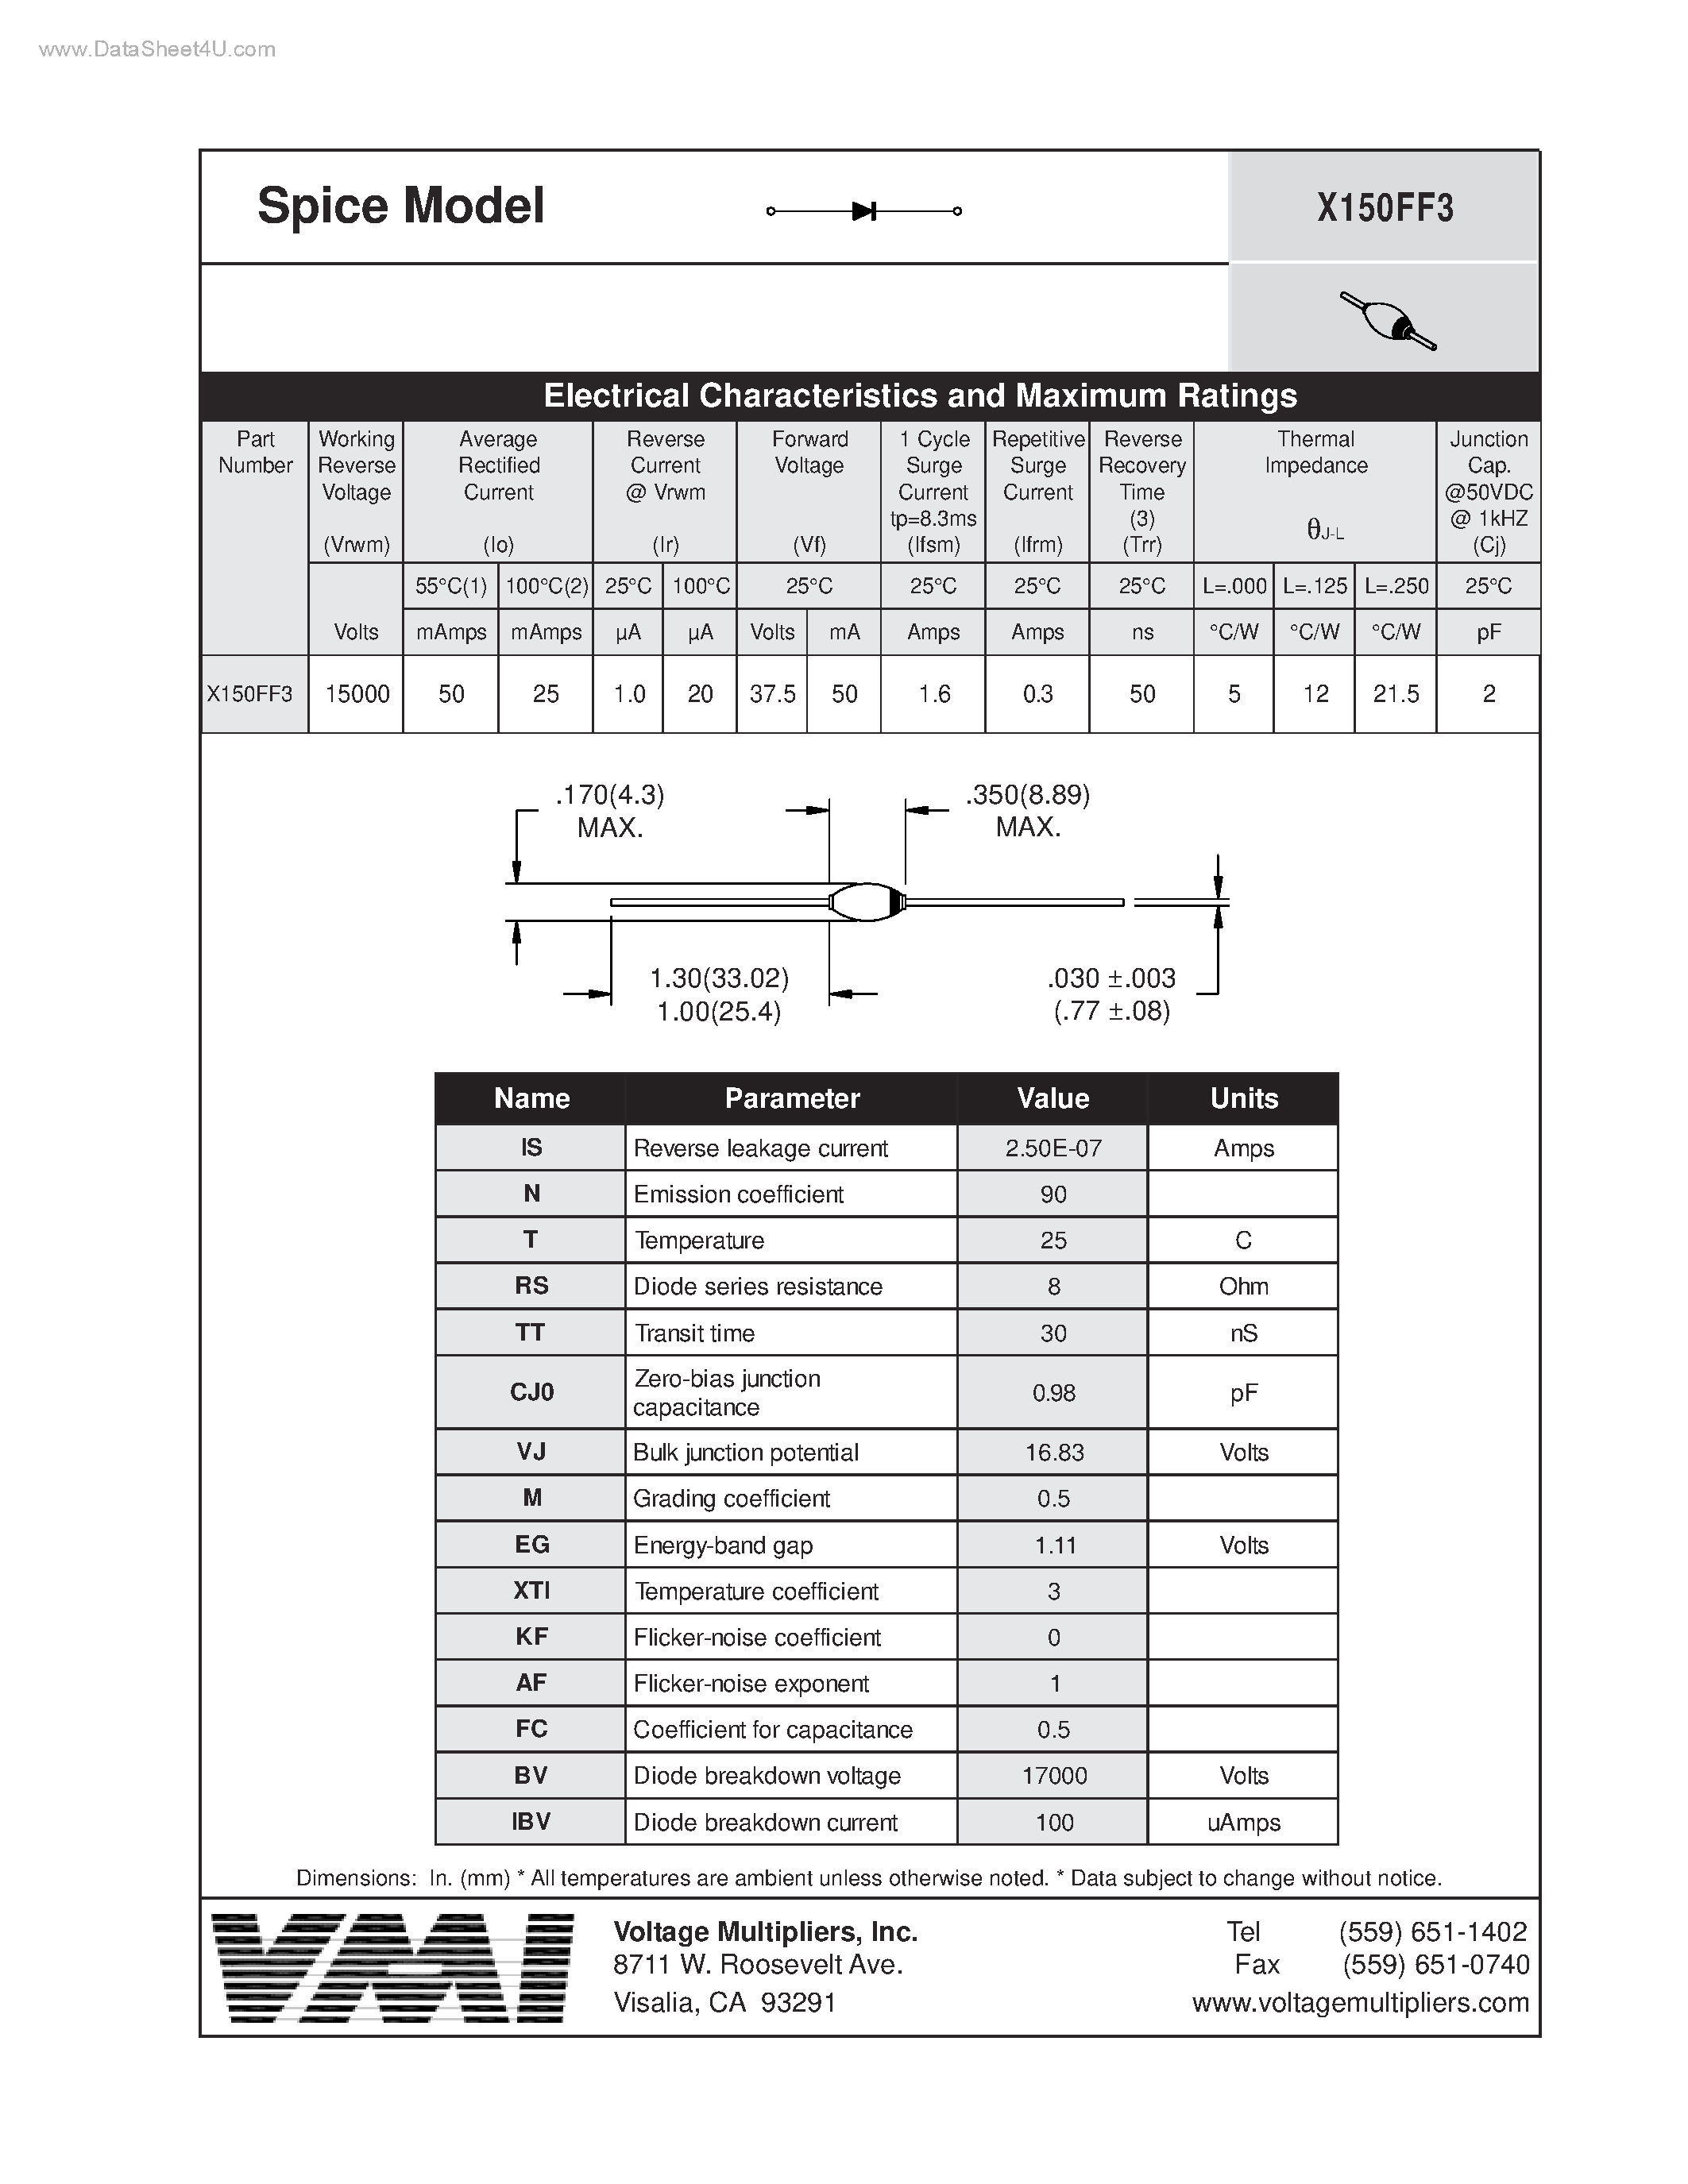 Datasheet X150FF3 - Spice Model page 1